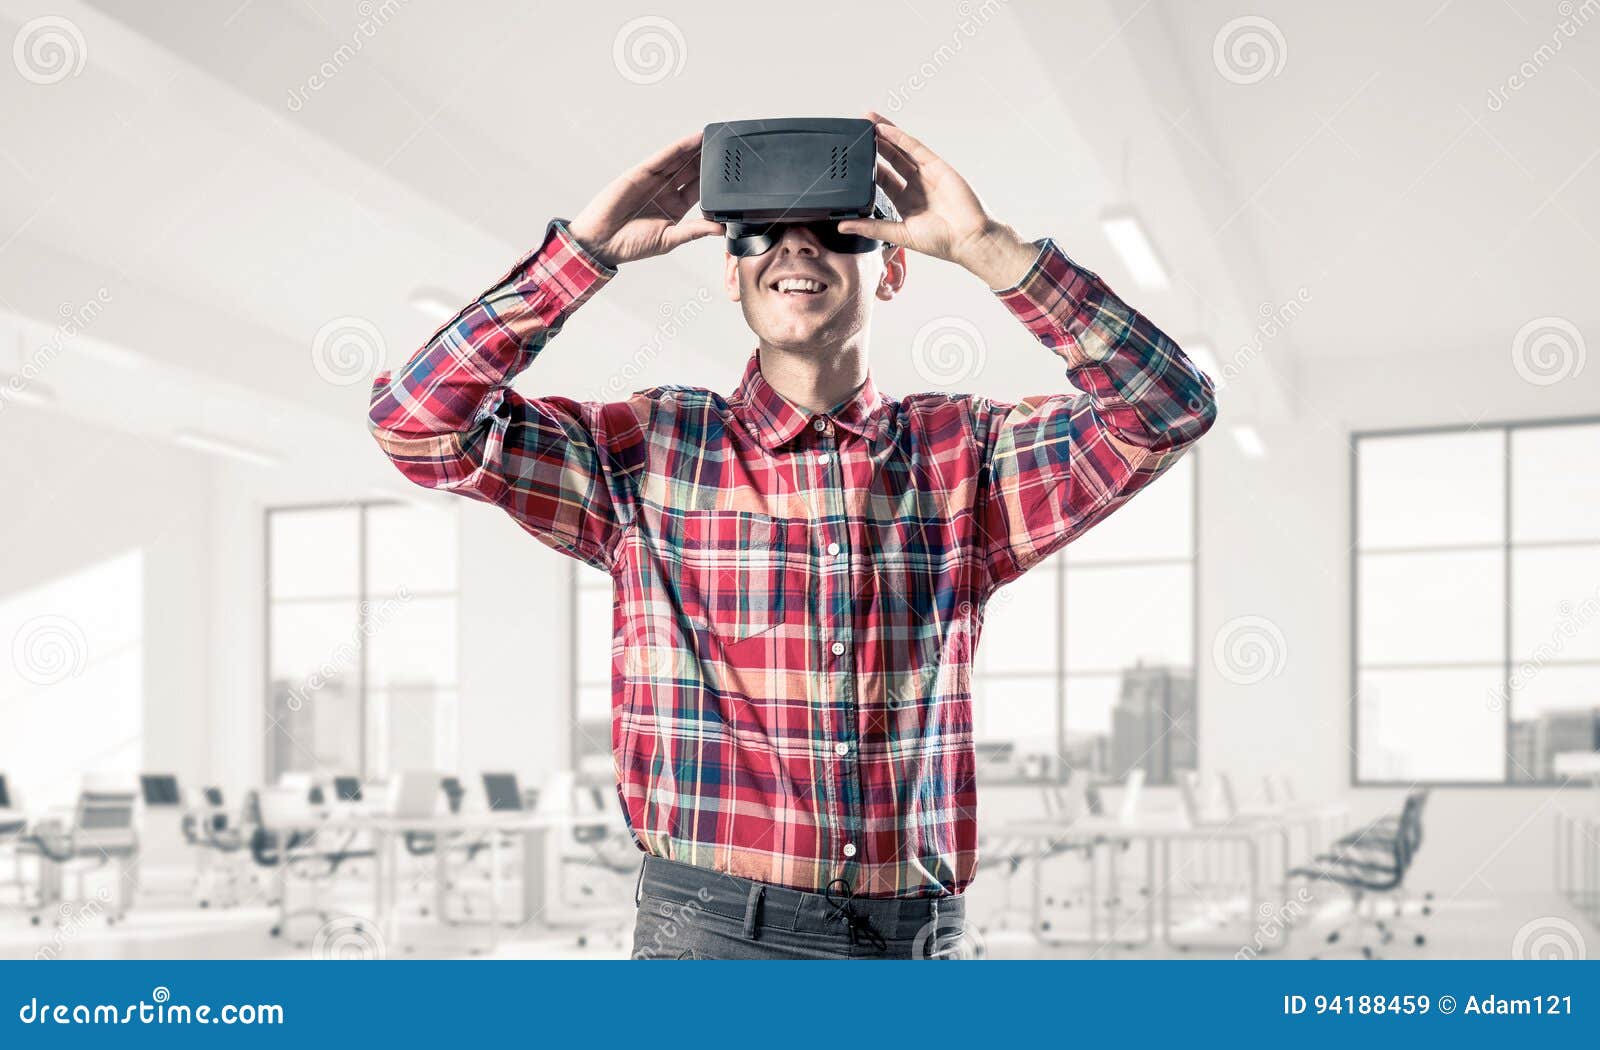 Concept of Modern Entertaining Technologies with Man Wearing Virtual ...